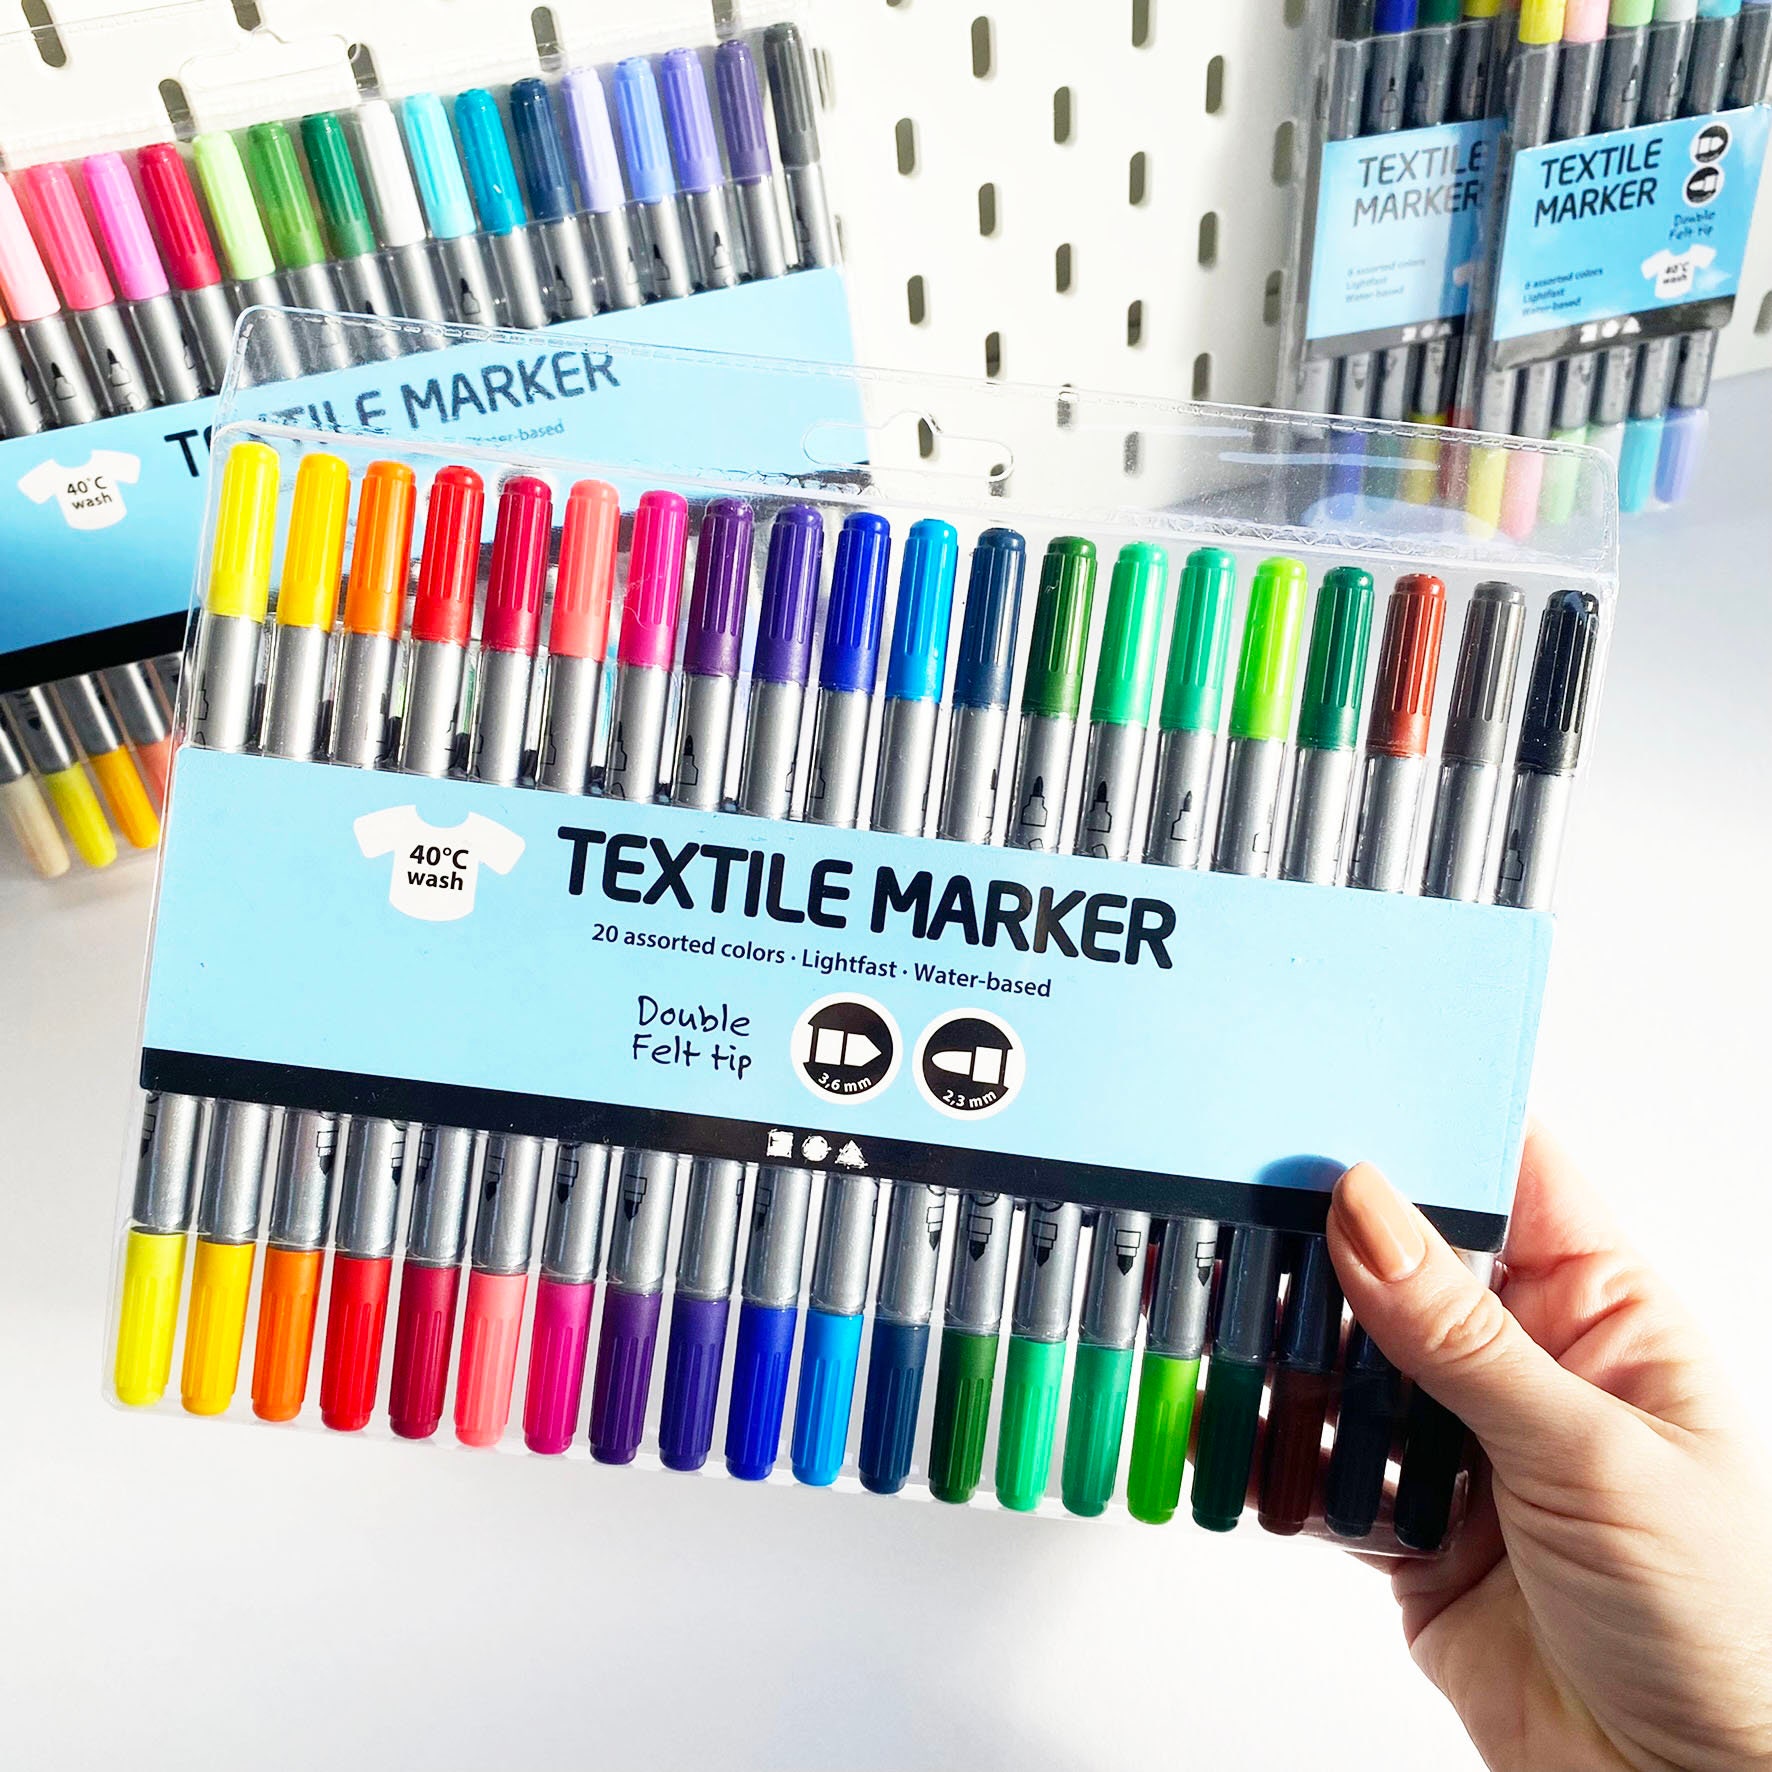 Art Marker Sets Alcohol Based Permanent Markers for Sketching